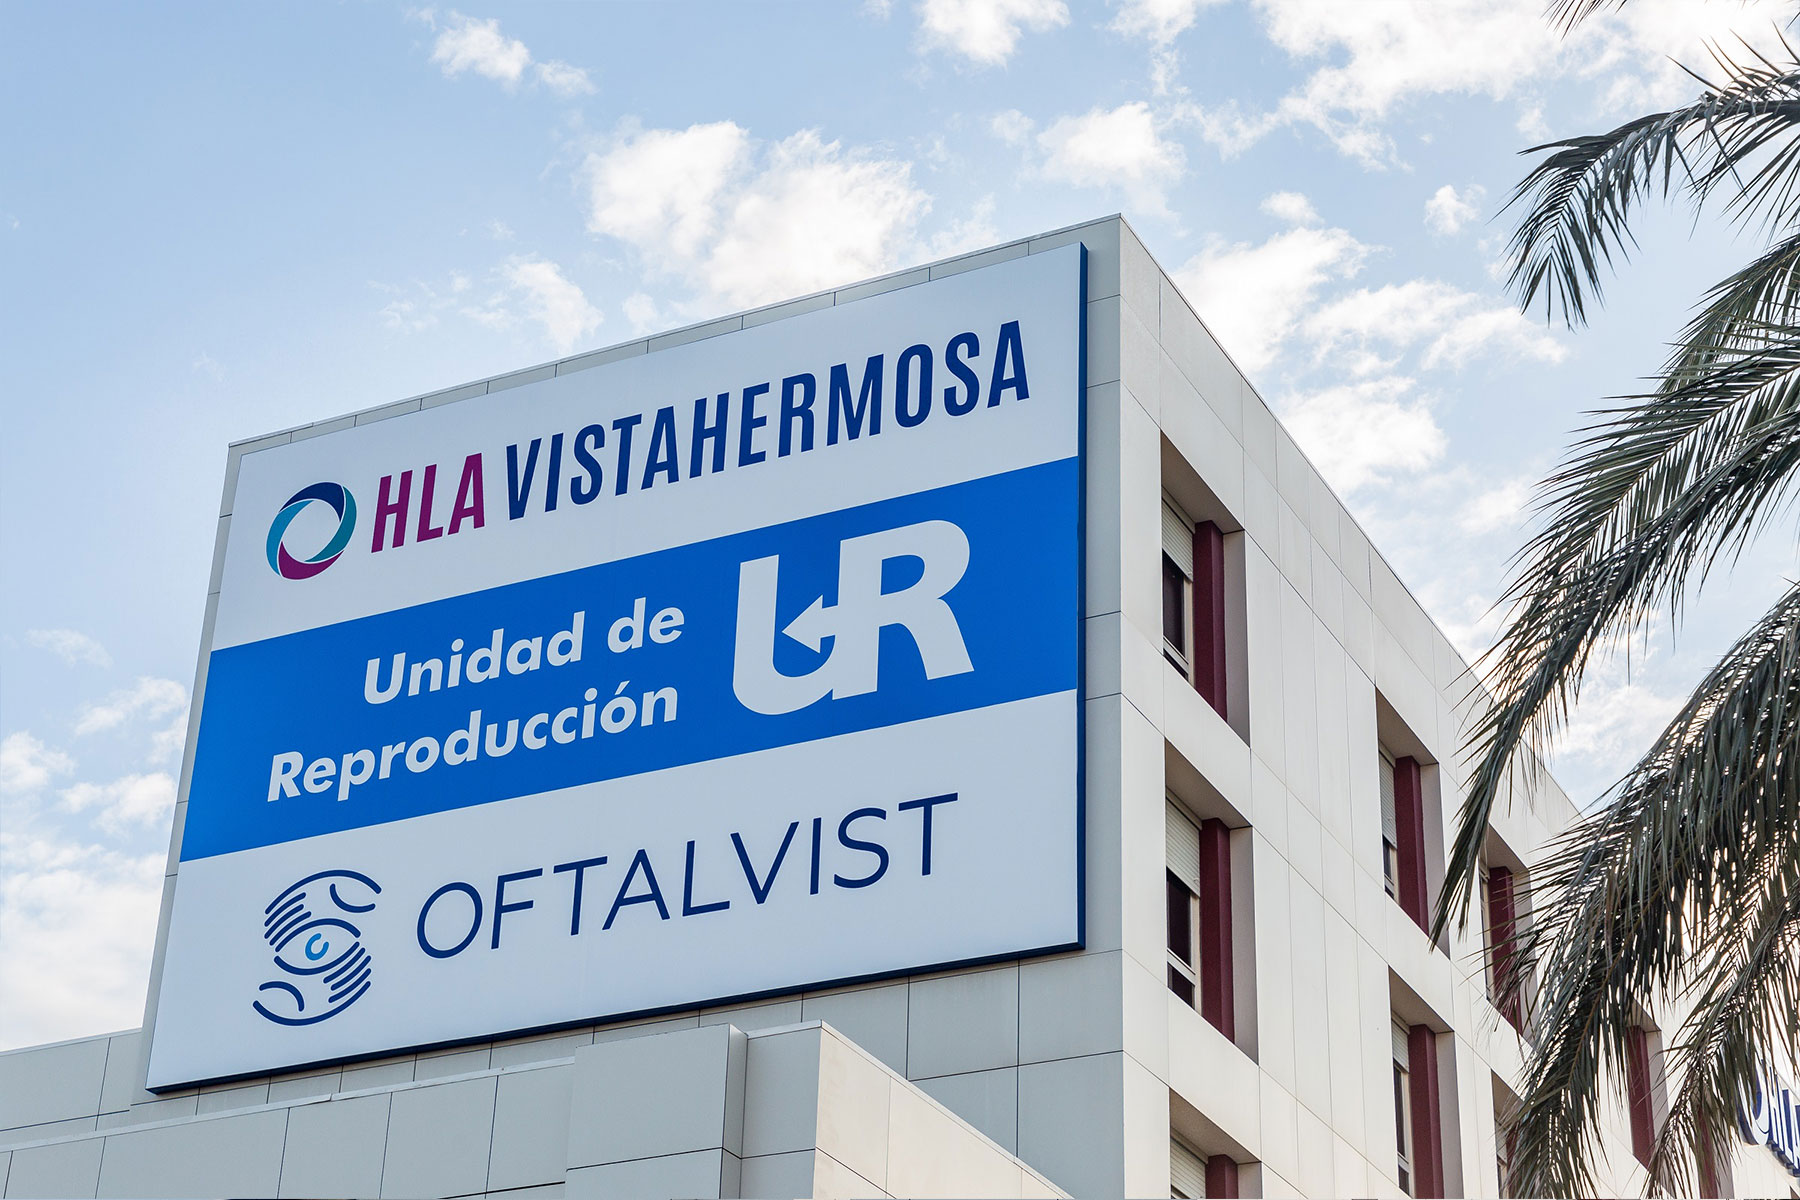 For the third consecutive year, HLA Vistahermosa has been revalidated as the best private hospital in Alicante.